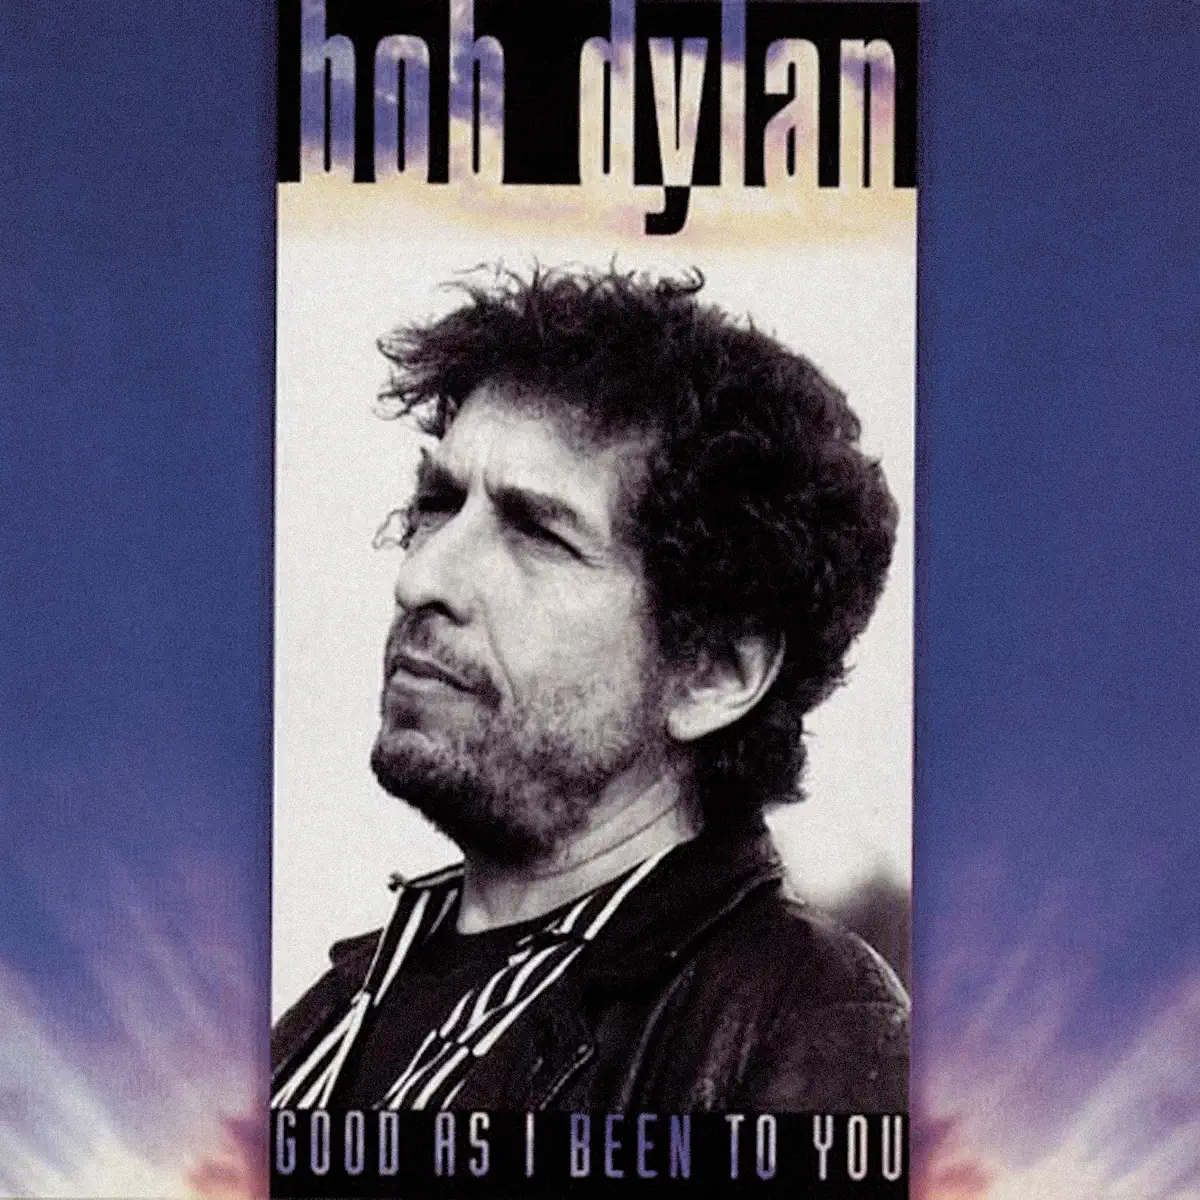 Bob Dylan - Good As I Been to You (Remastered) (1992) [iTunes Plus AAC M4A]-新房子